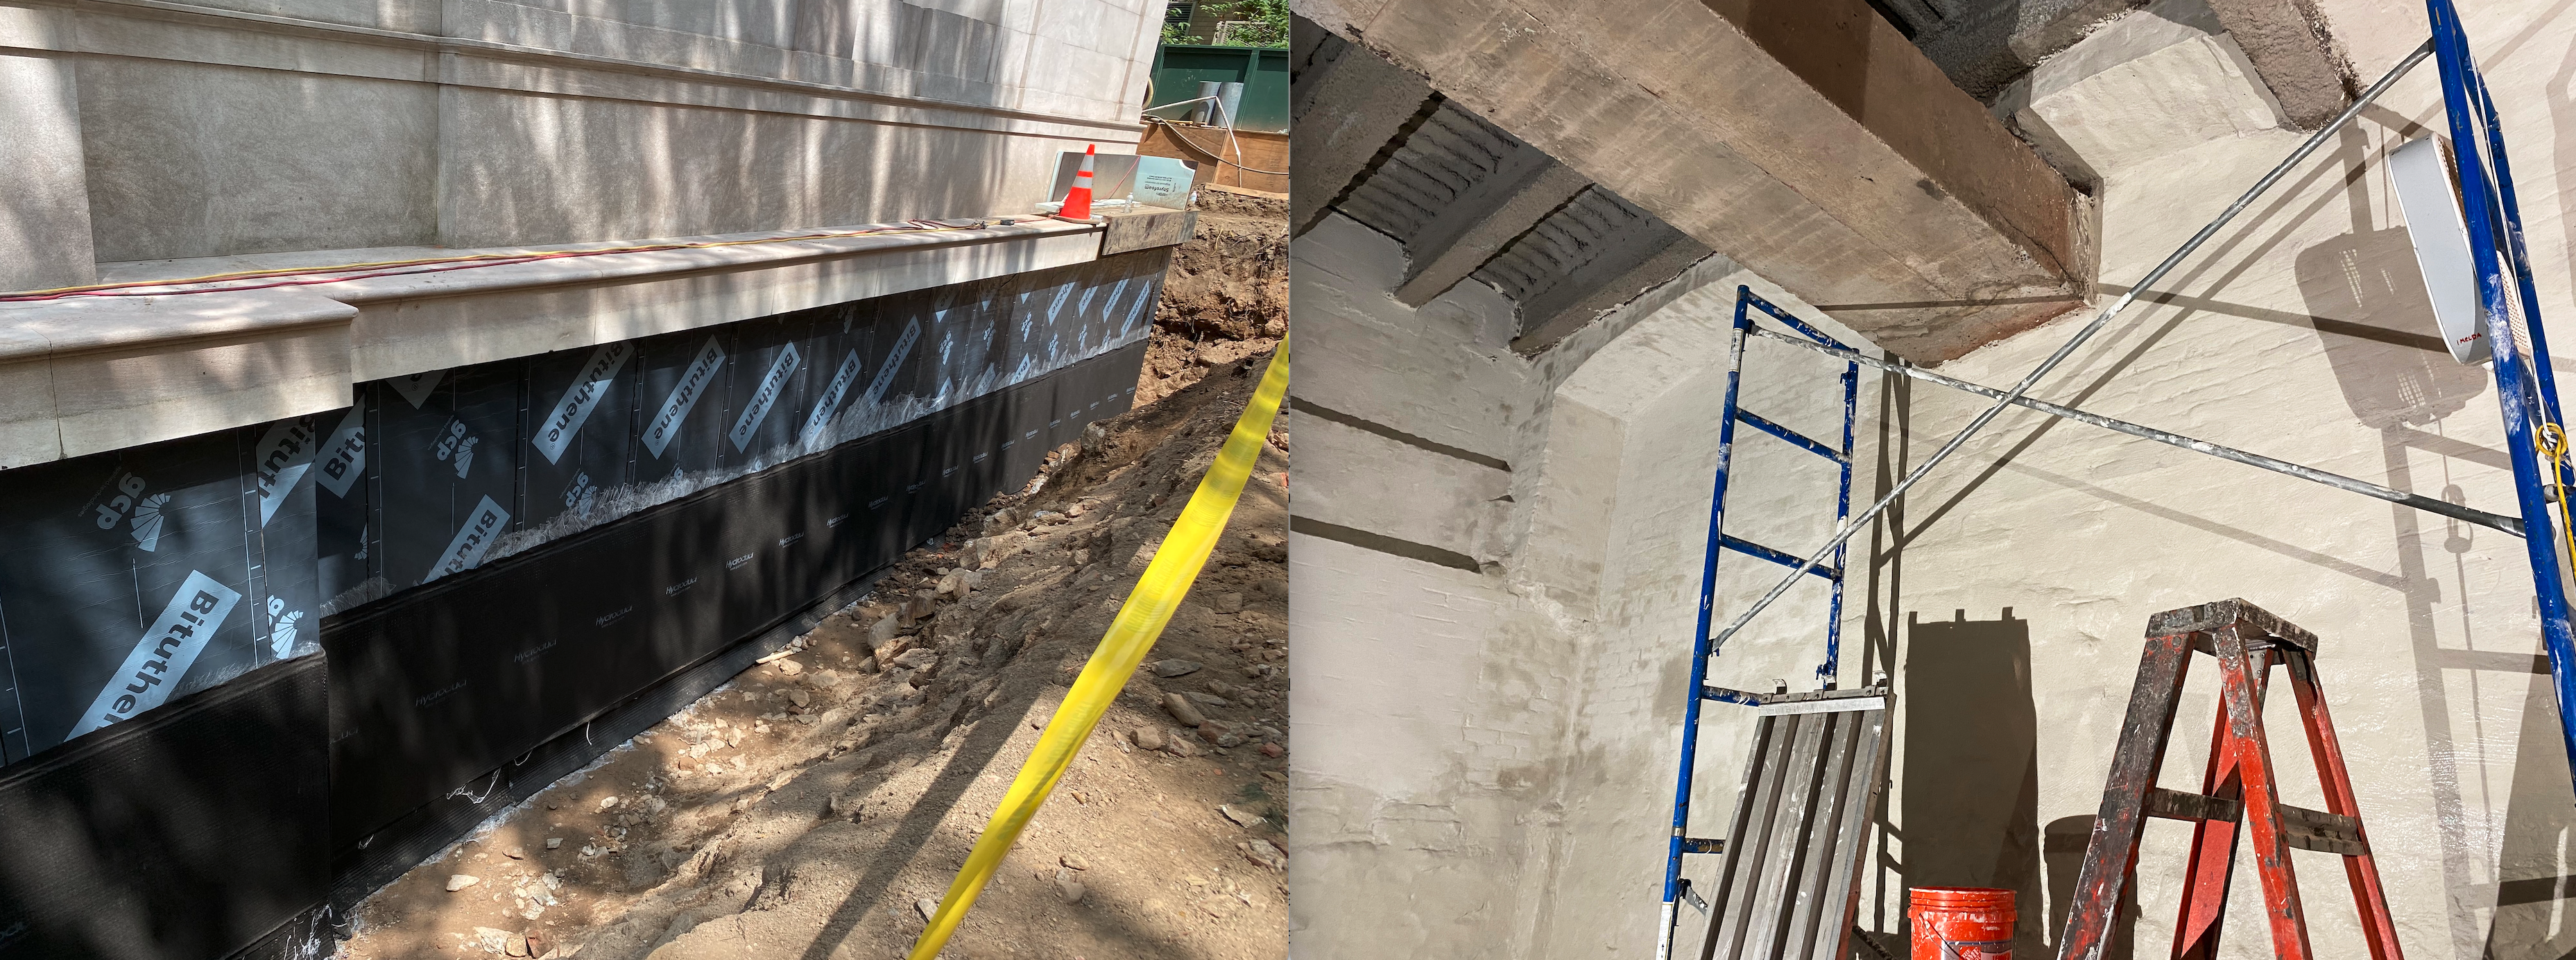 Positive-side foundation waterproofing (left) is exterior; negative-side (right) is at the interior. Photo courtesy Hoffmann Architects